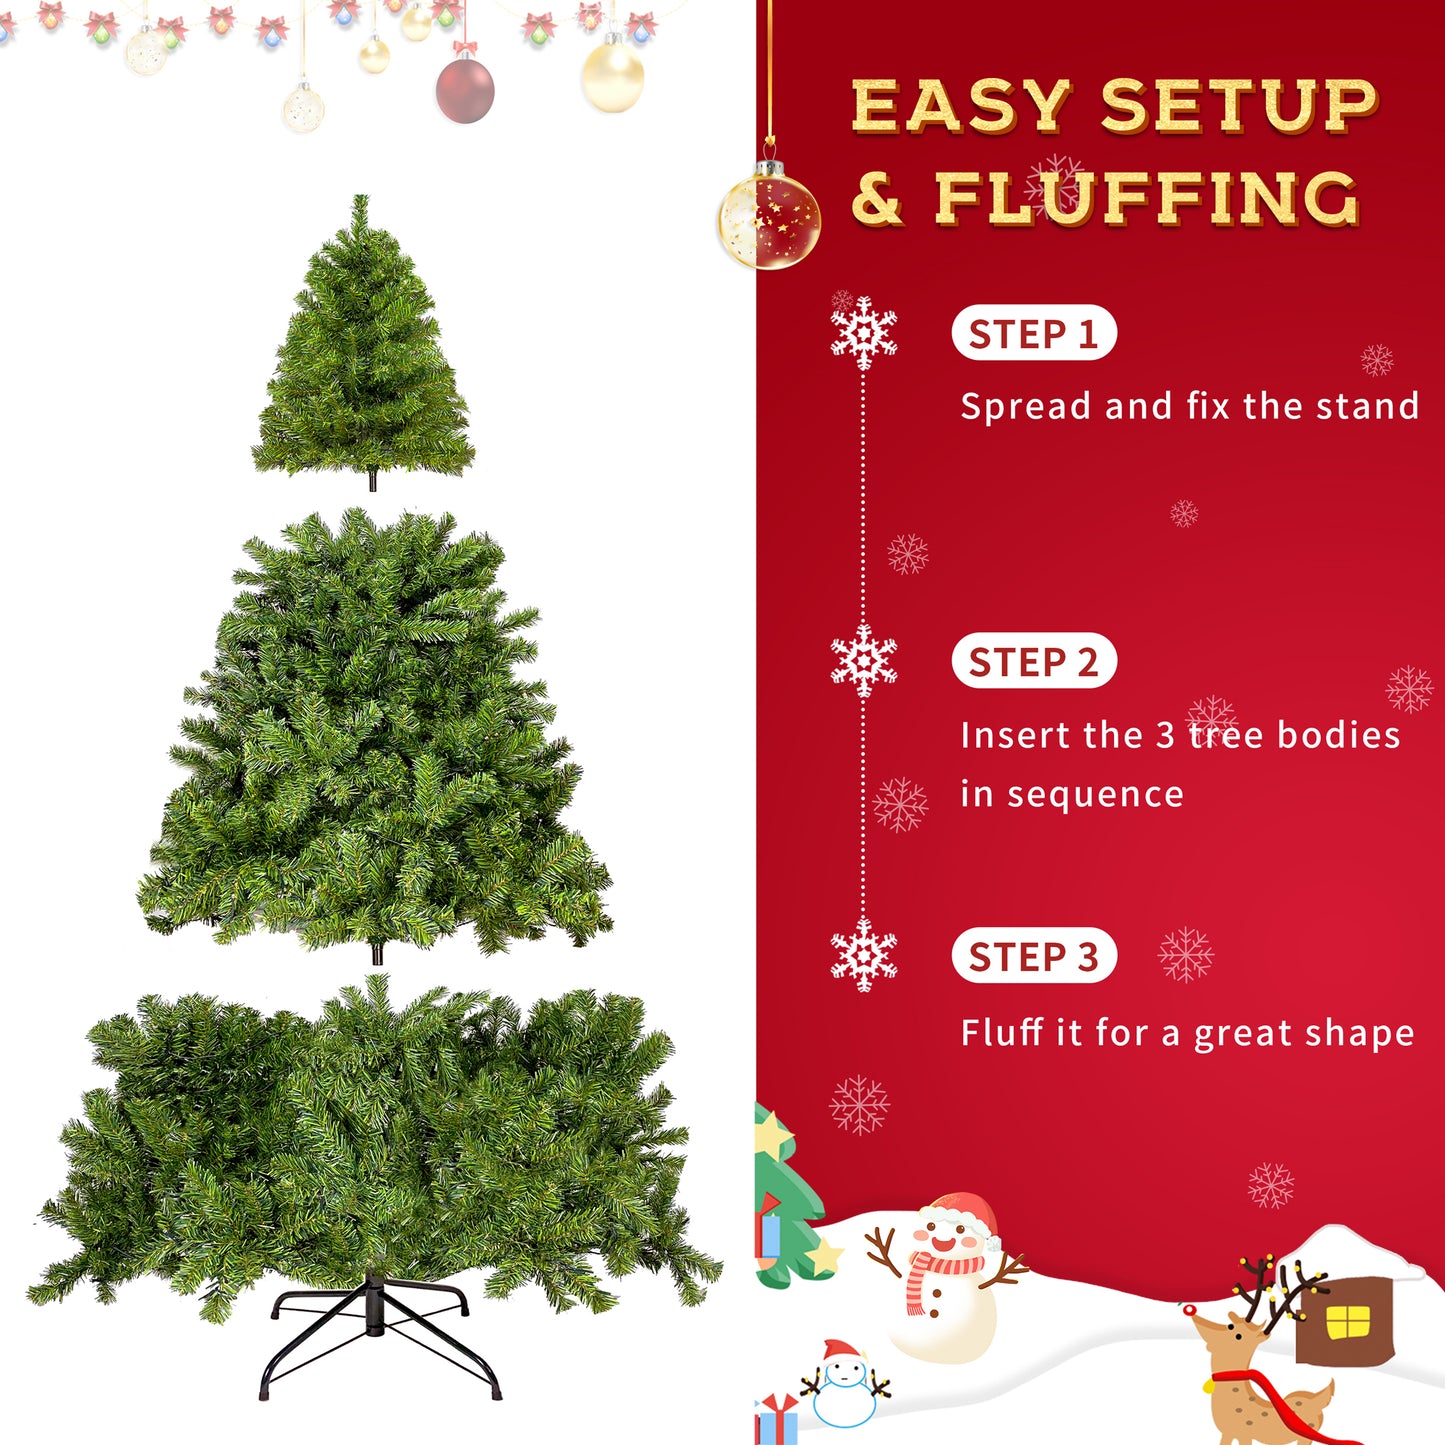 7.5ft Artificial Christmas Tree, SYNGAR Pre-Lit Xmas Tree with 400 Warm White LED Lights for Home/Party Decor, Holiday Spruce Christmas Tree with 1420 Tips, Metal Hinge & Foldable Stand, Y032